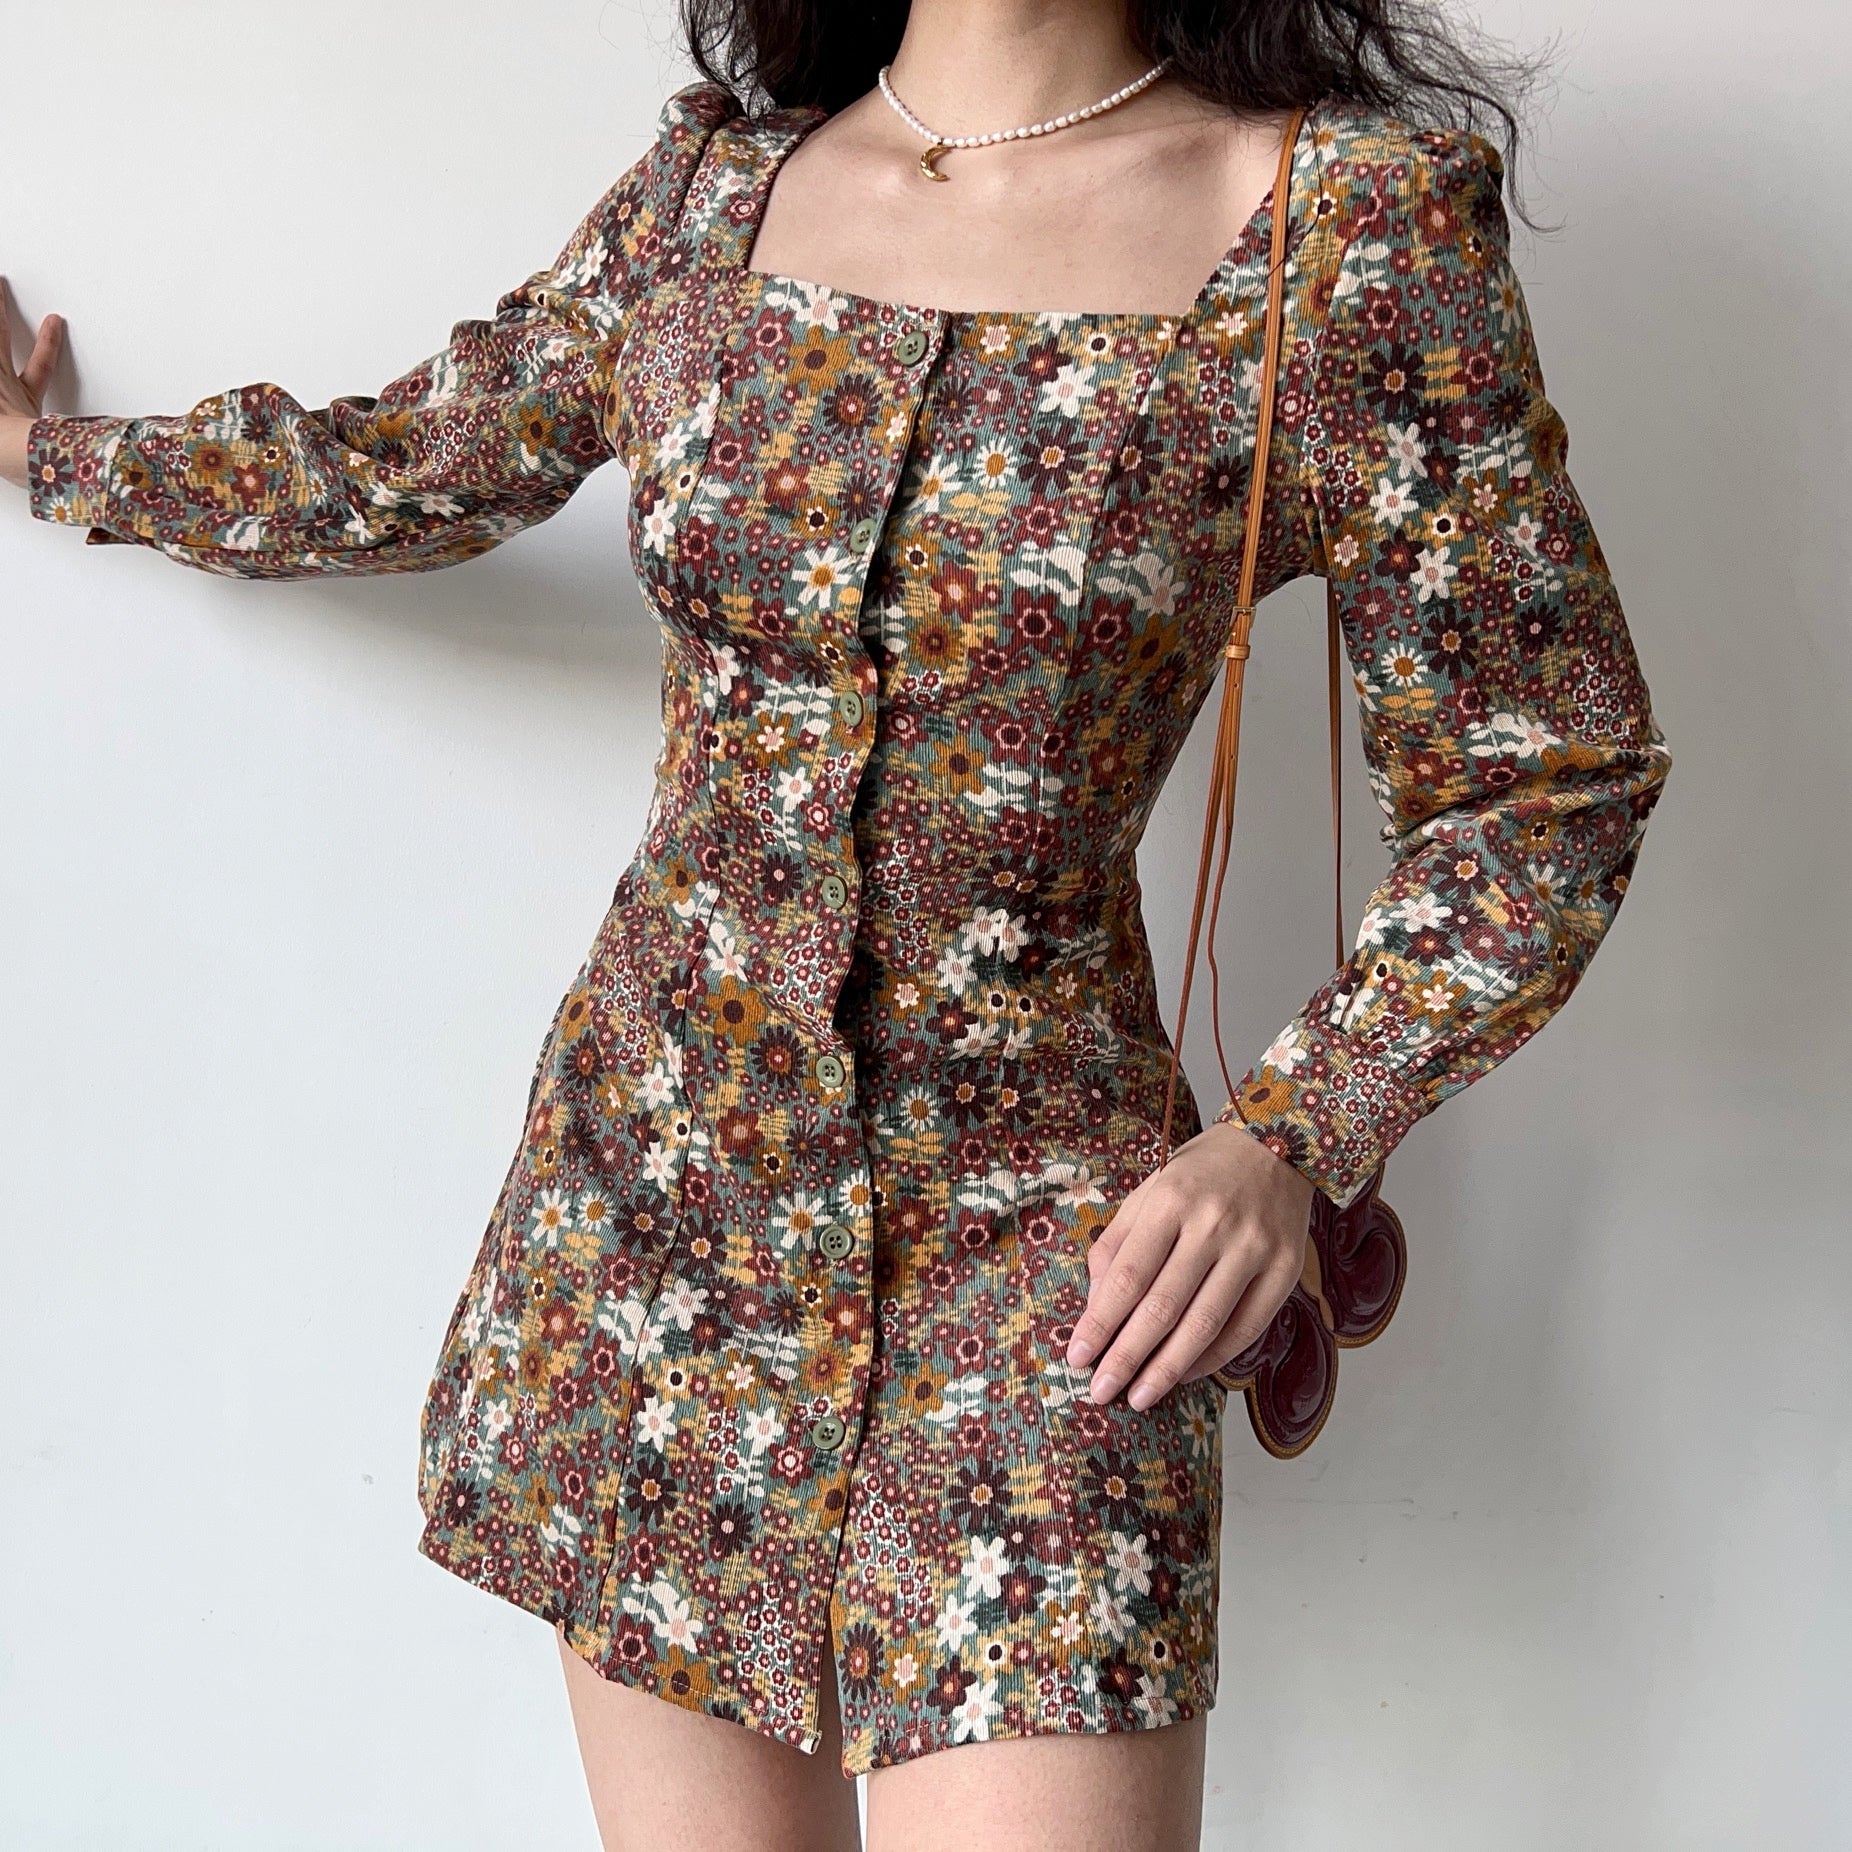 Cinessd - French Quilt Floral Dress